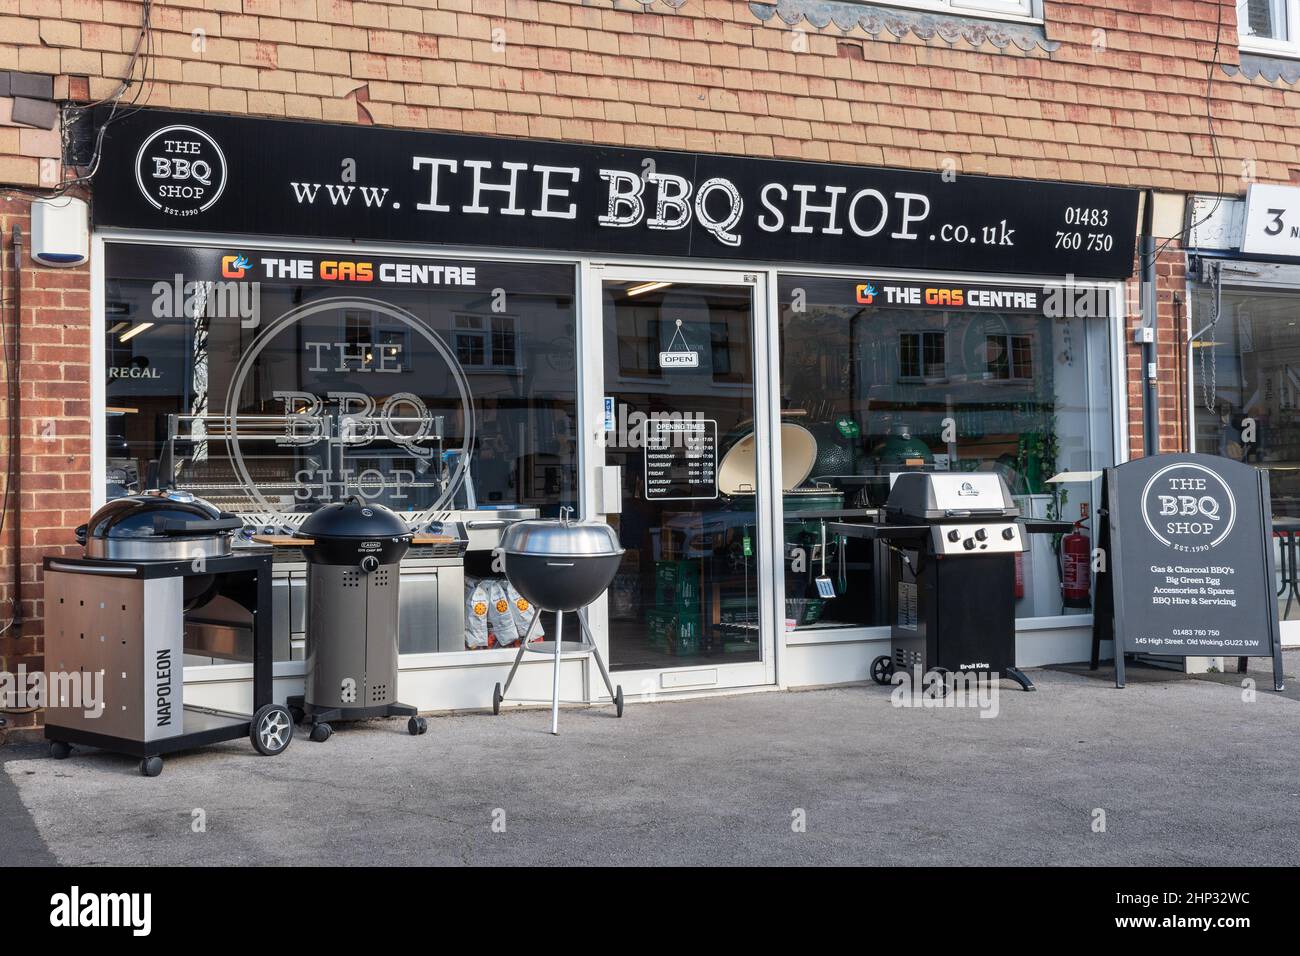 The BBQ Shop, a specialist shop business in Old Woking, Surrey, UK selling barbecues Stock Photo